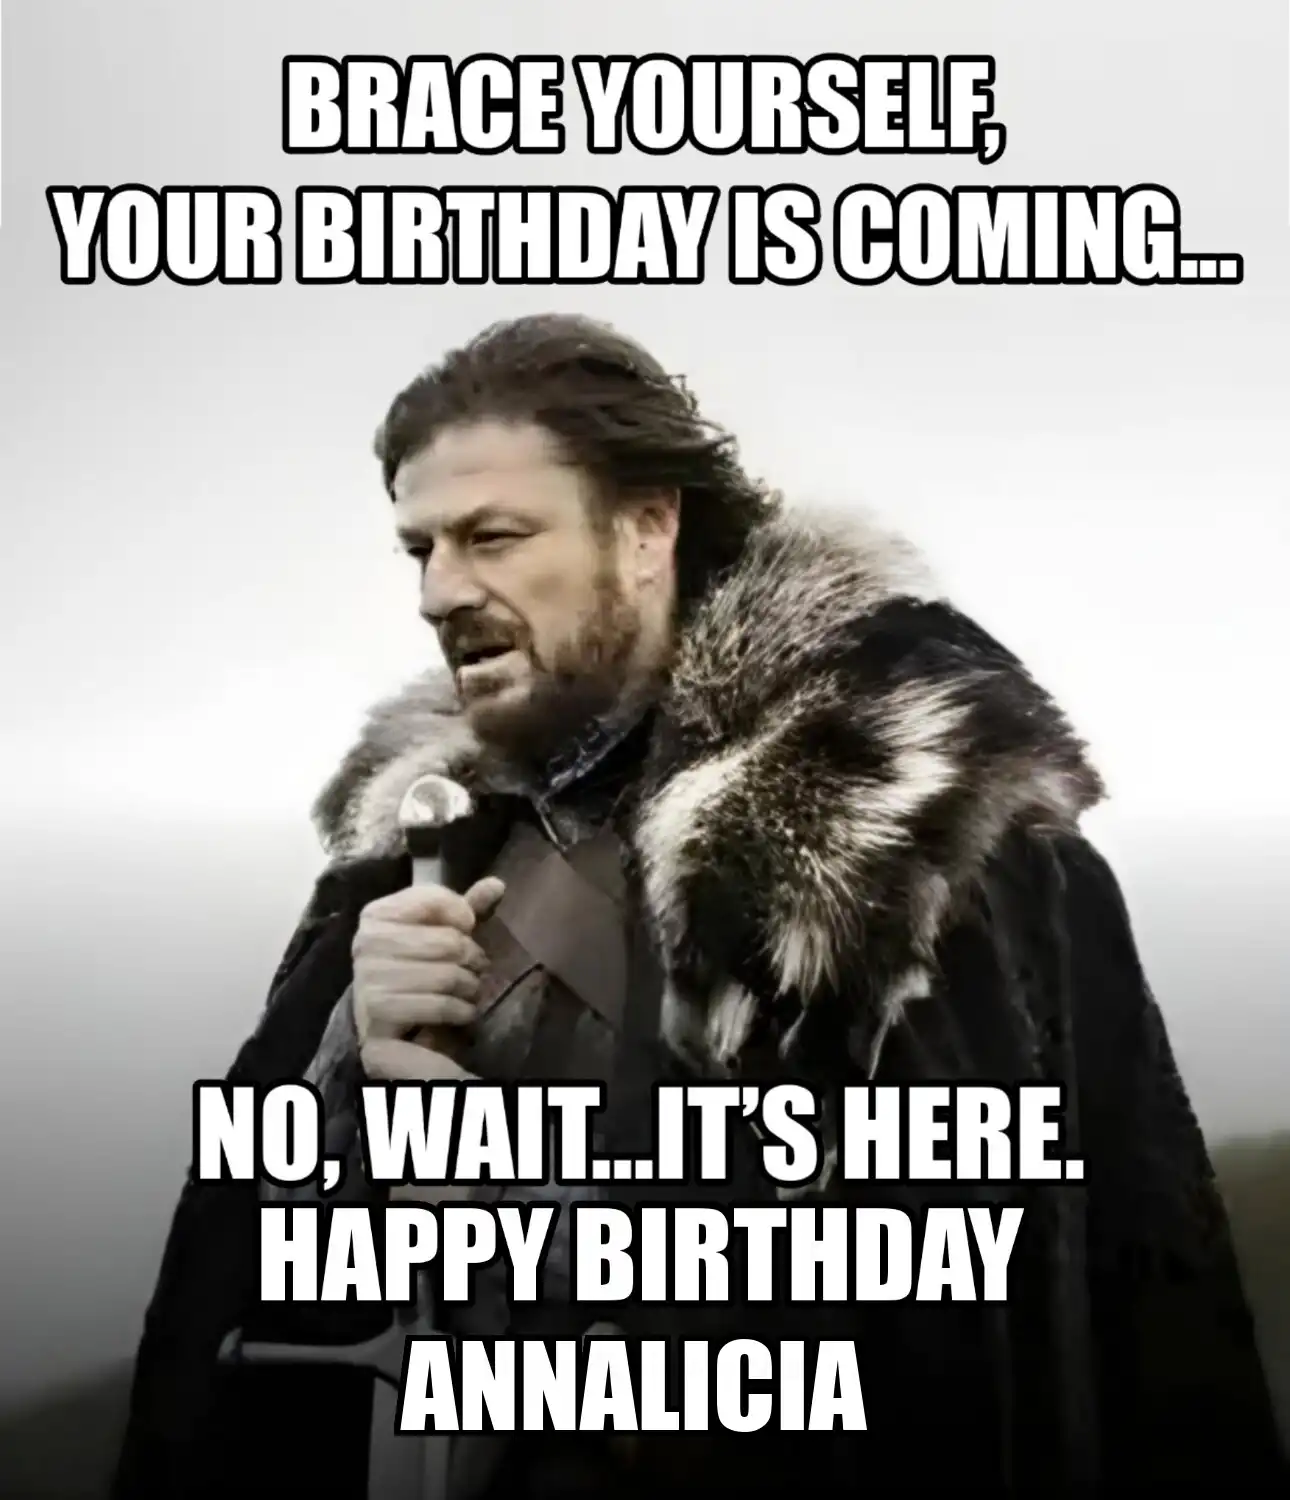 Happy Birthday Annalicia Brace Yourself Your Birthday Is Coming Meme